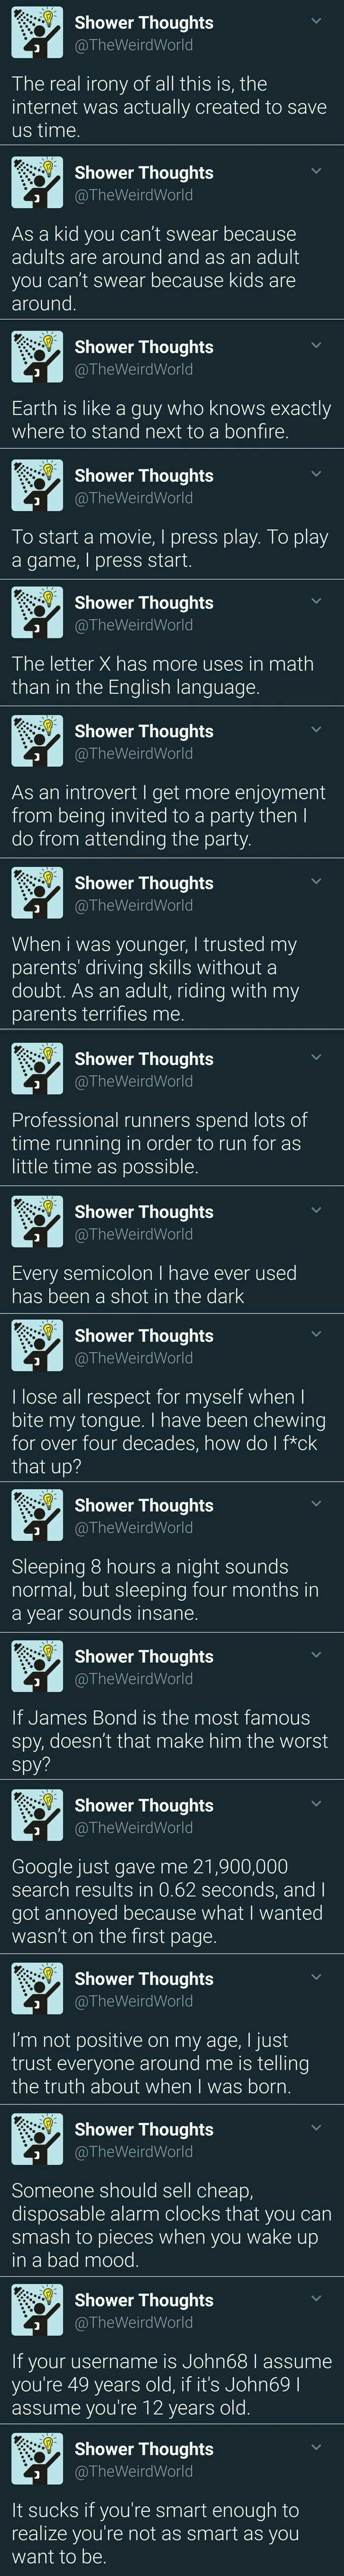 a collection of shower thoughts